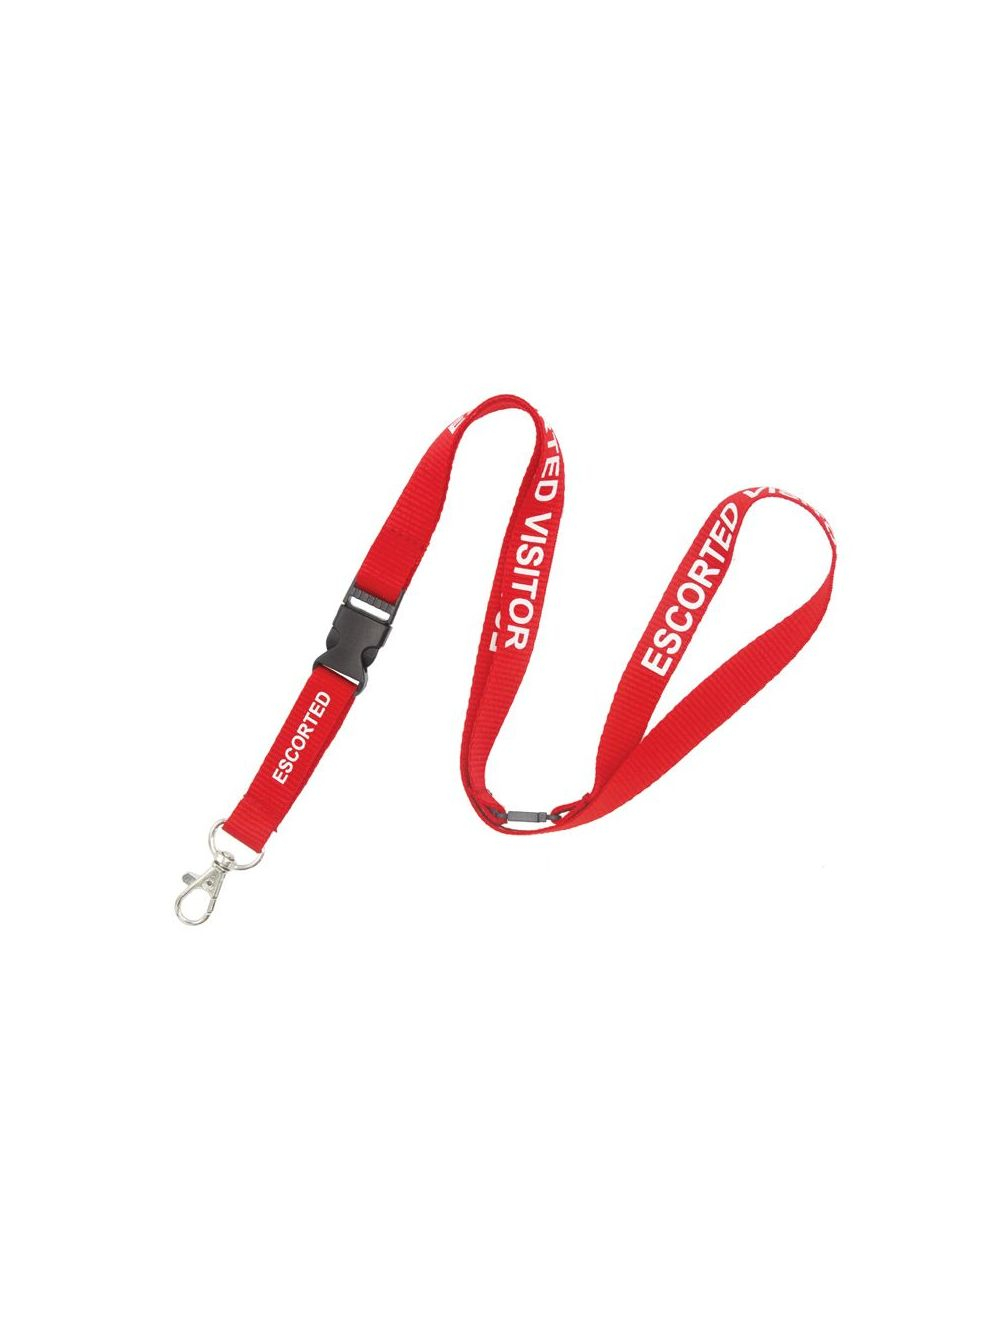 Escorted Visitor Lanyard Pack 50, 16mm with Trigger Hook and Breakaway - Red